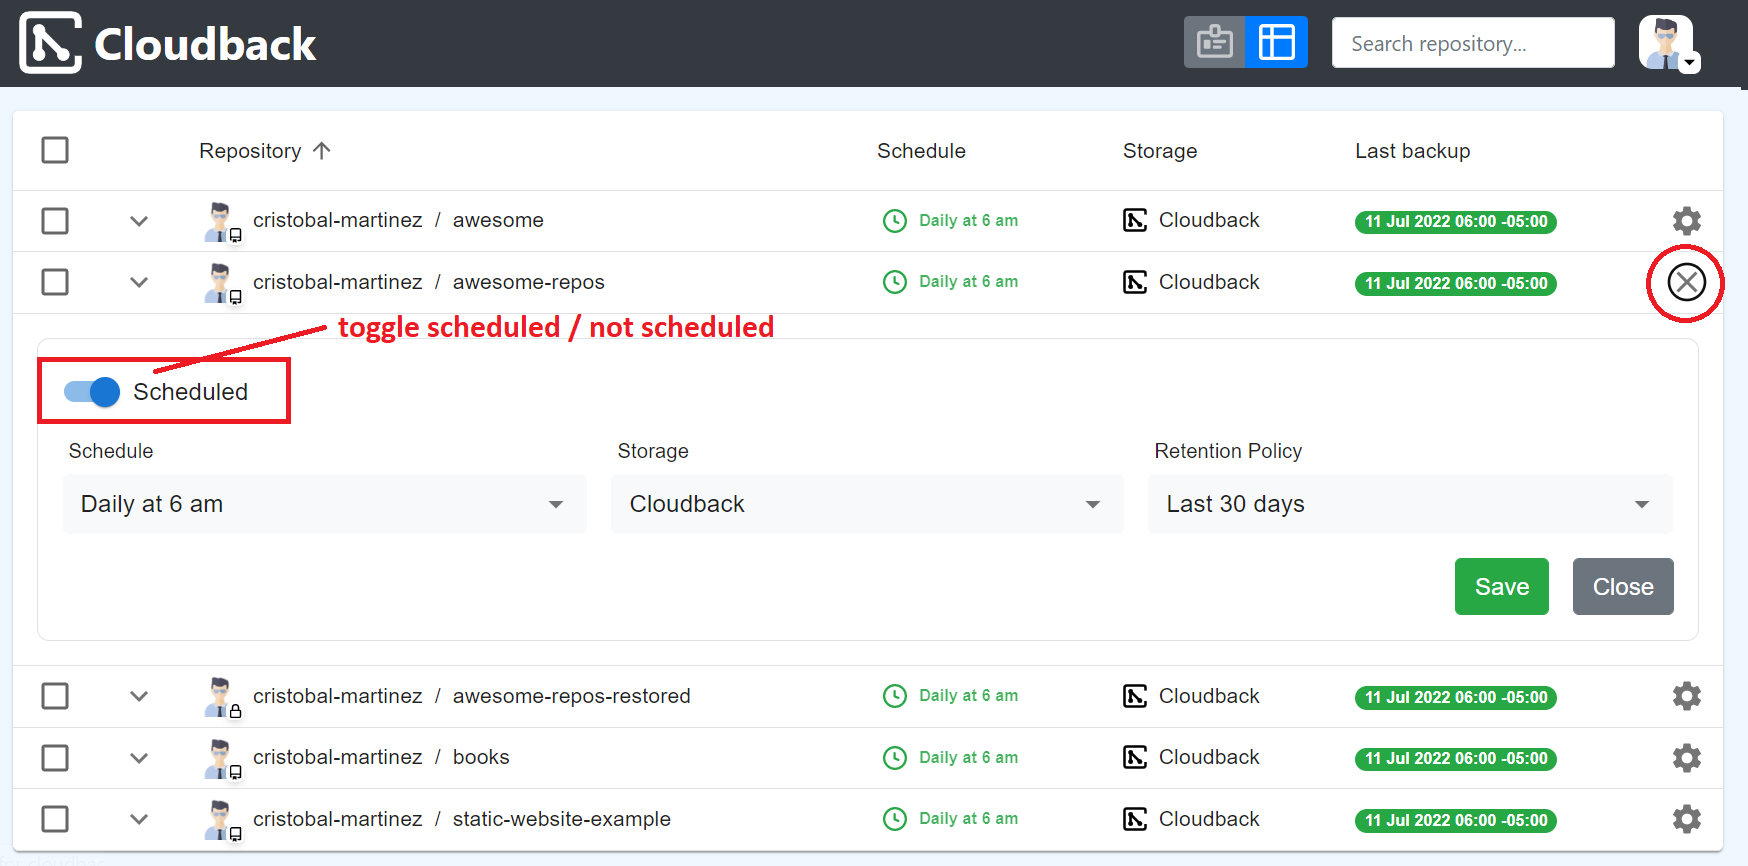 GitHub repository backup settings on the table view